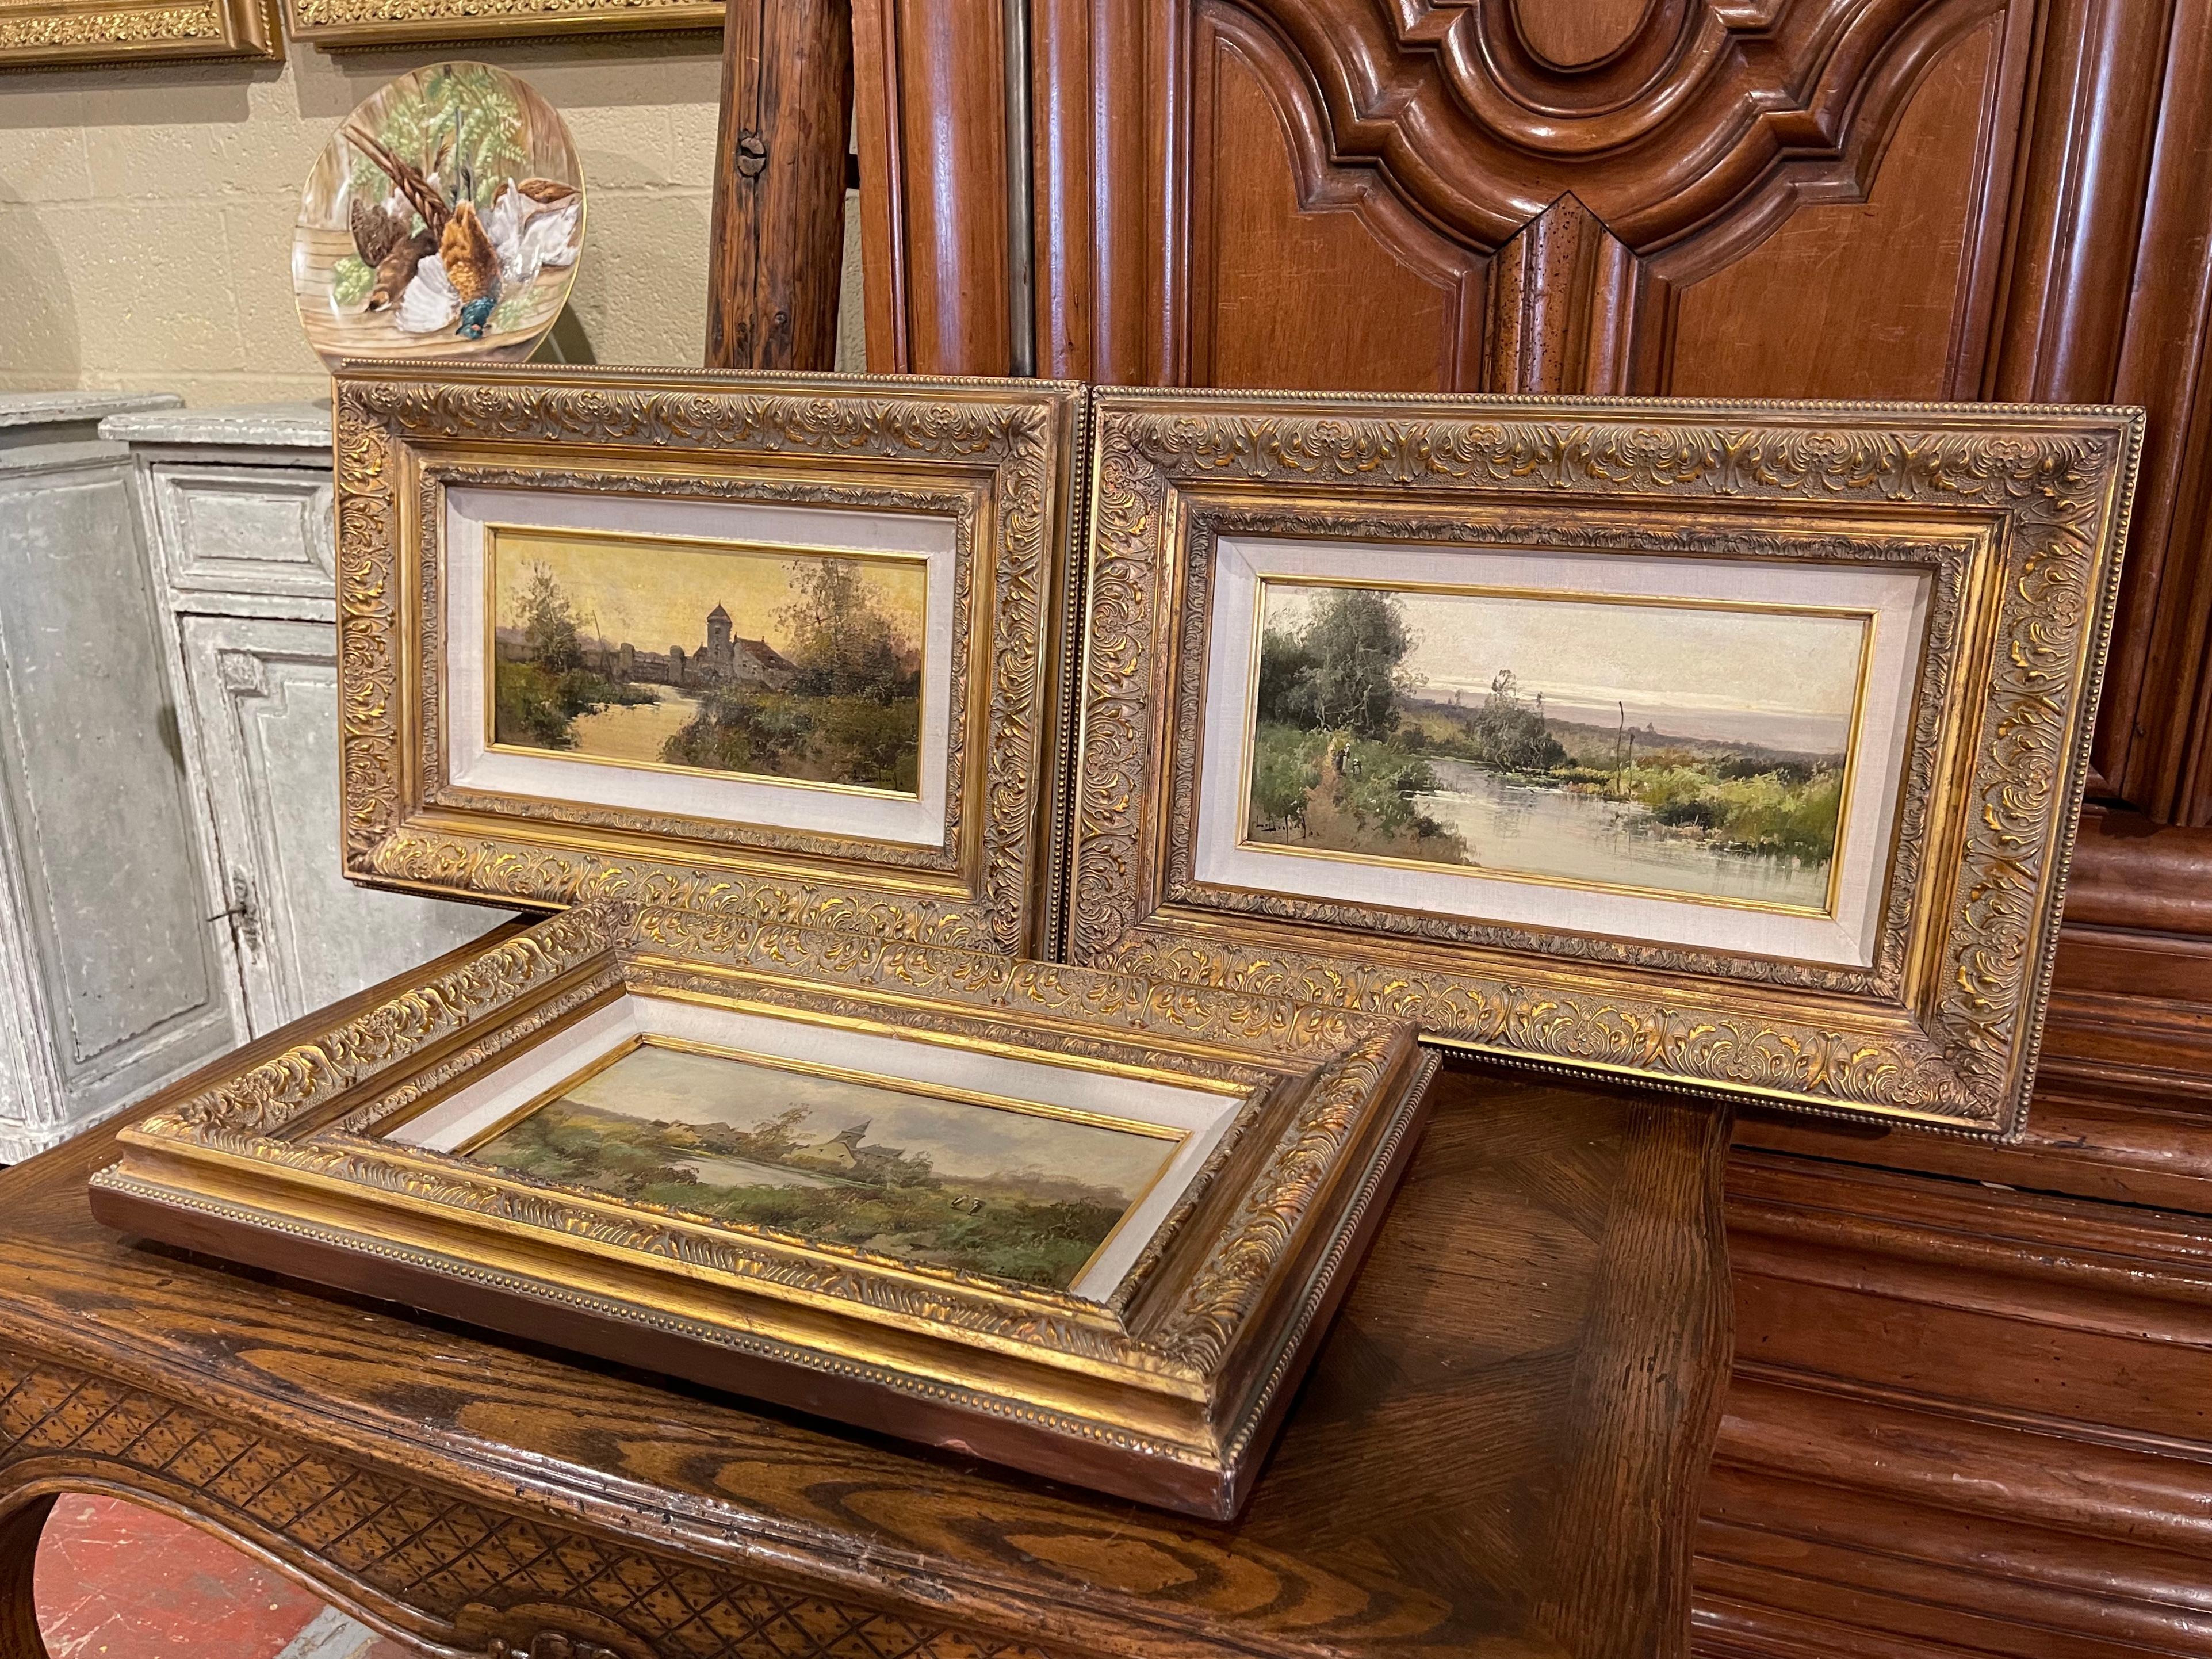 Decorate a study, living room or den with this beautiful and colorful suite of antique paintings! Painted in France circa 1890, the artworks are set in carved gilt wood frames and illustrate picturesque, countryside scenes in rural France in a post